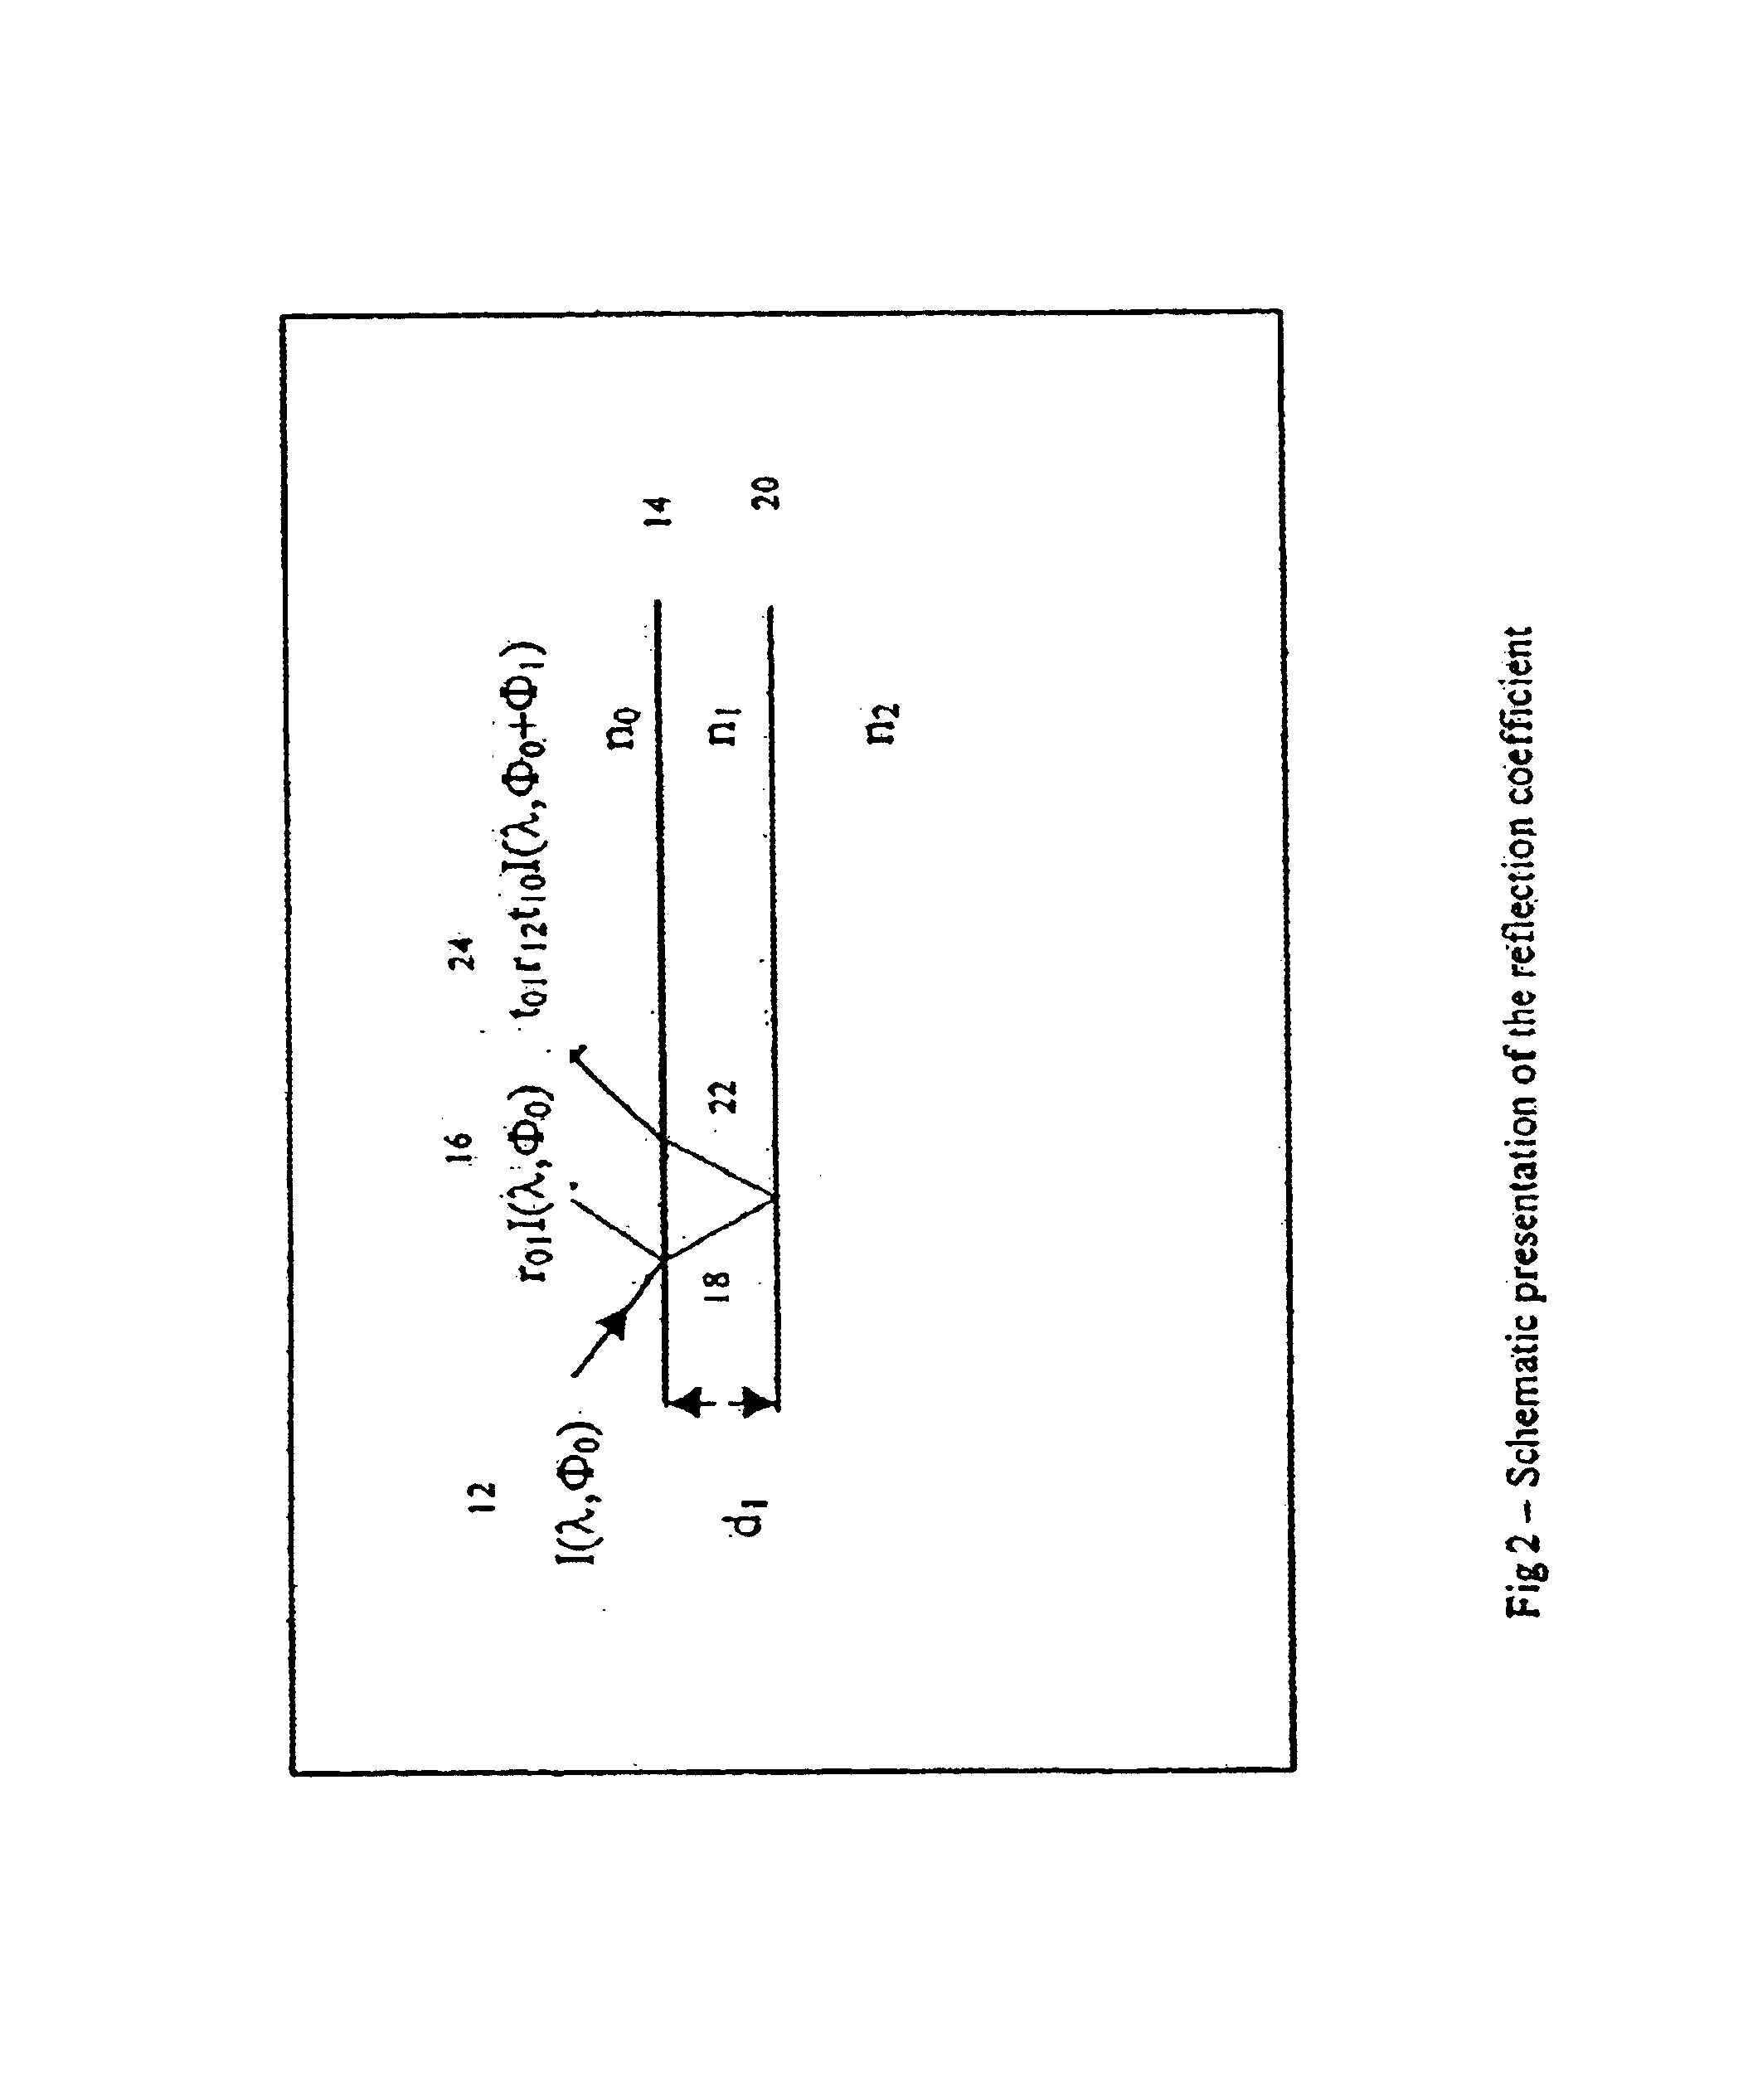 Method and apparatus for thickness decomposition of complicated layer structures